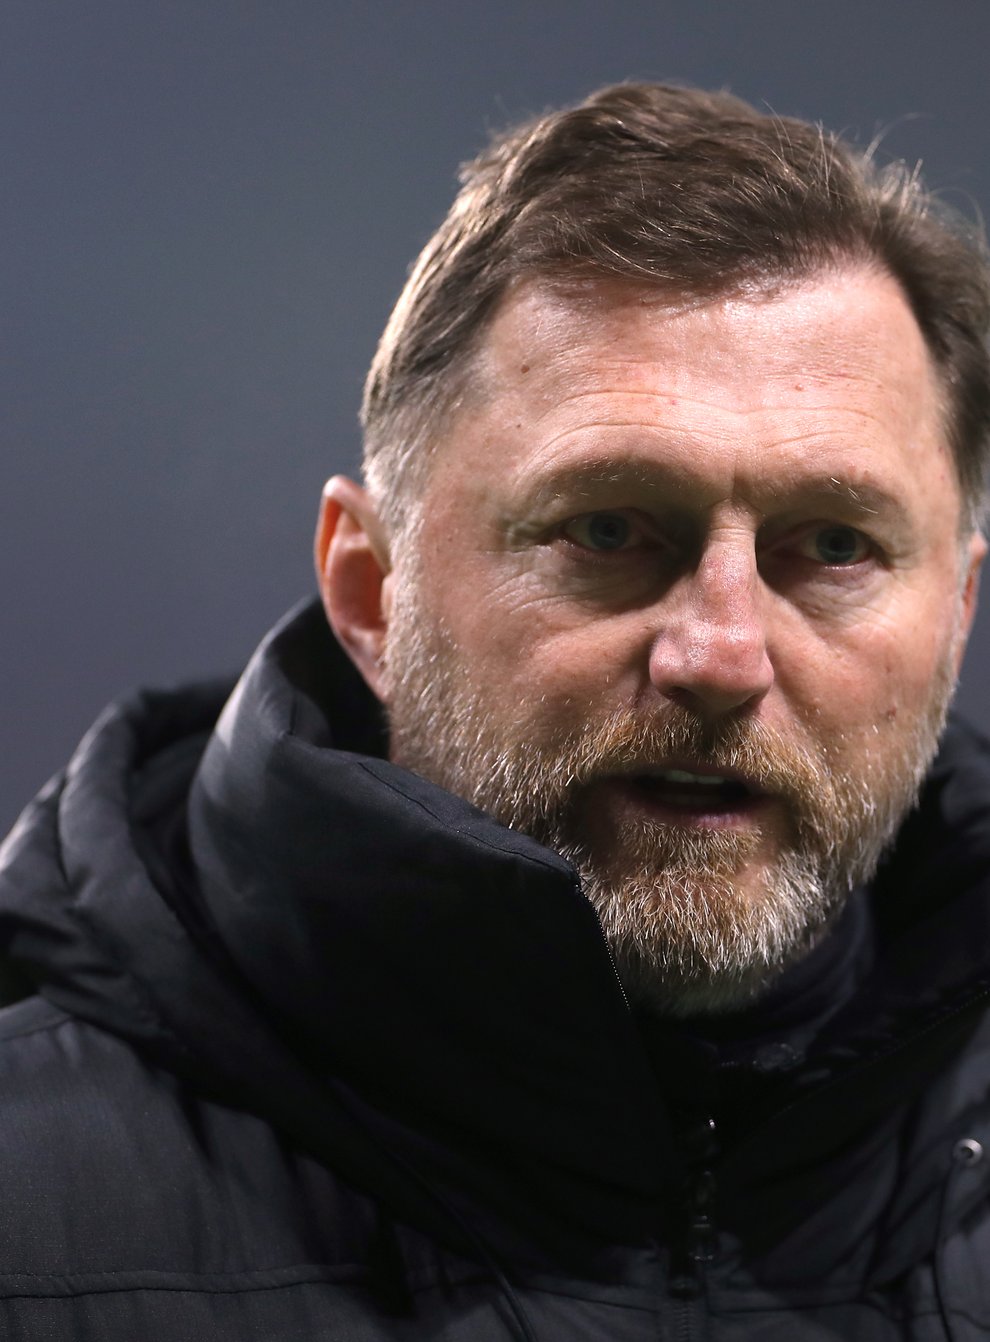 Ralph Hasenhuttl returns to Manchester United for the first time since his Southampton side lost there 9-0 in February 2021 (Bradley Collyer/PA)